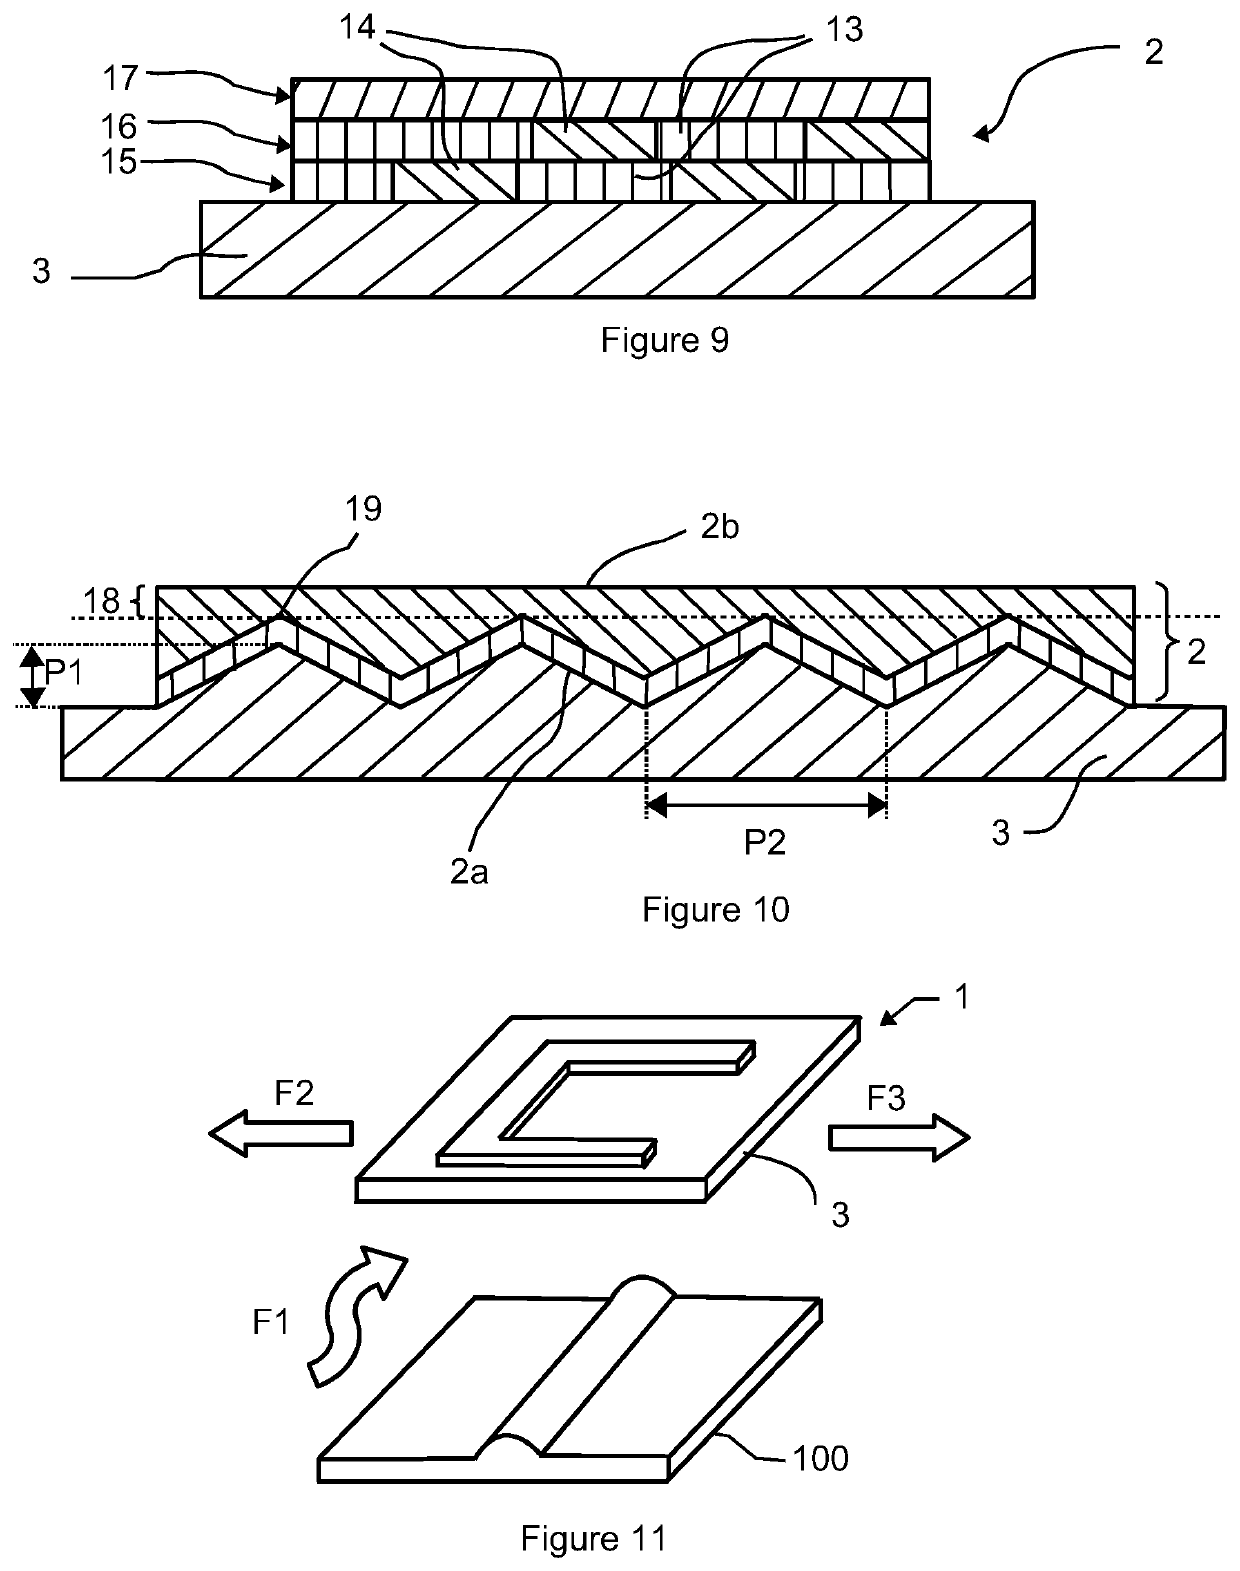 Device having a substrate configured to be thermoformed coupled to an electrically conductive member